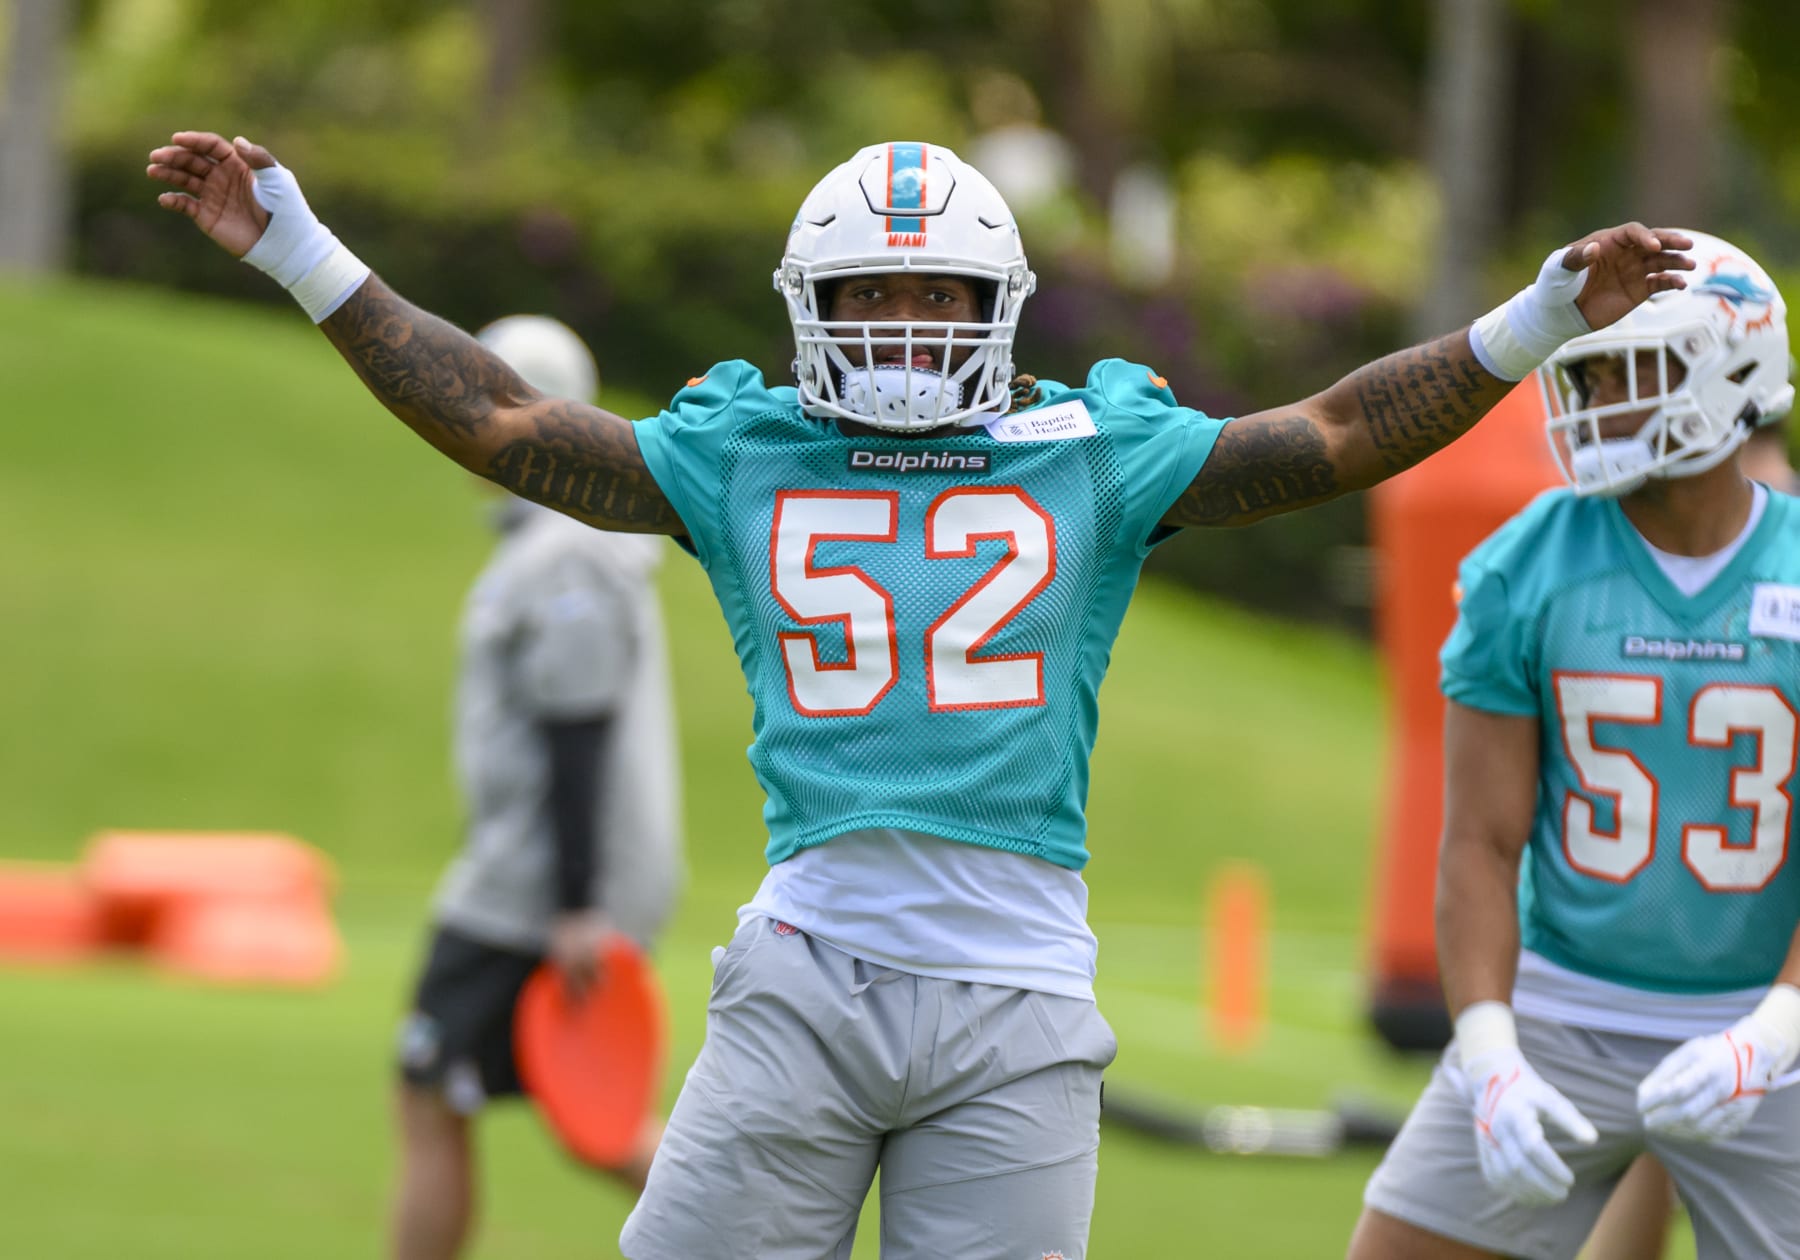 Miami Dolphins players to rotate as team DJ for OTA practices